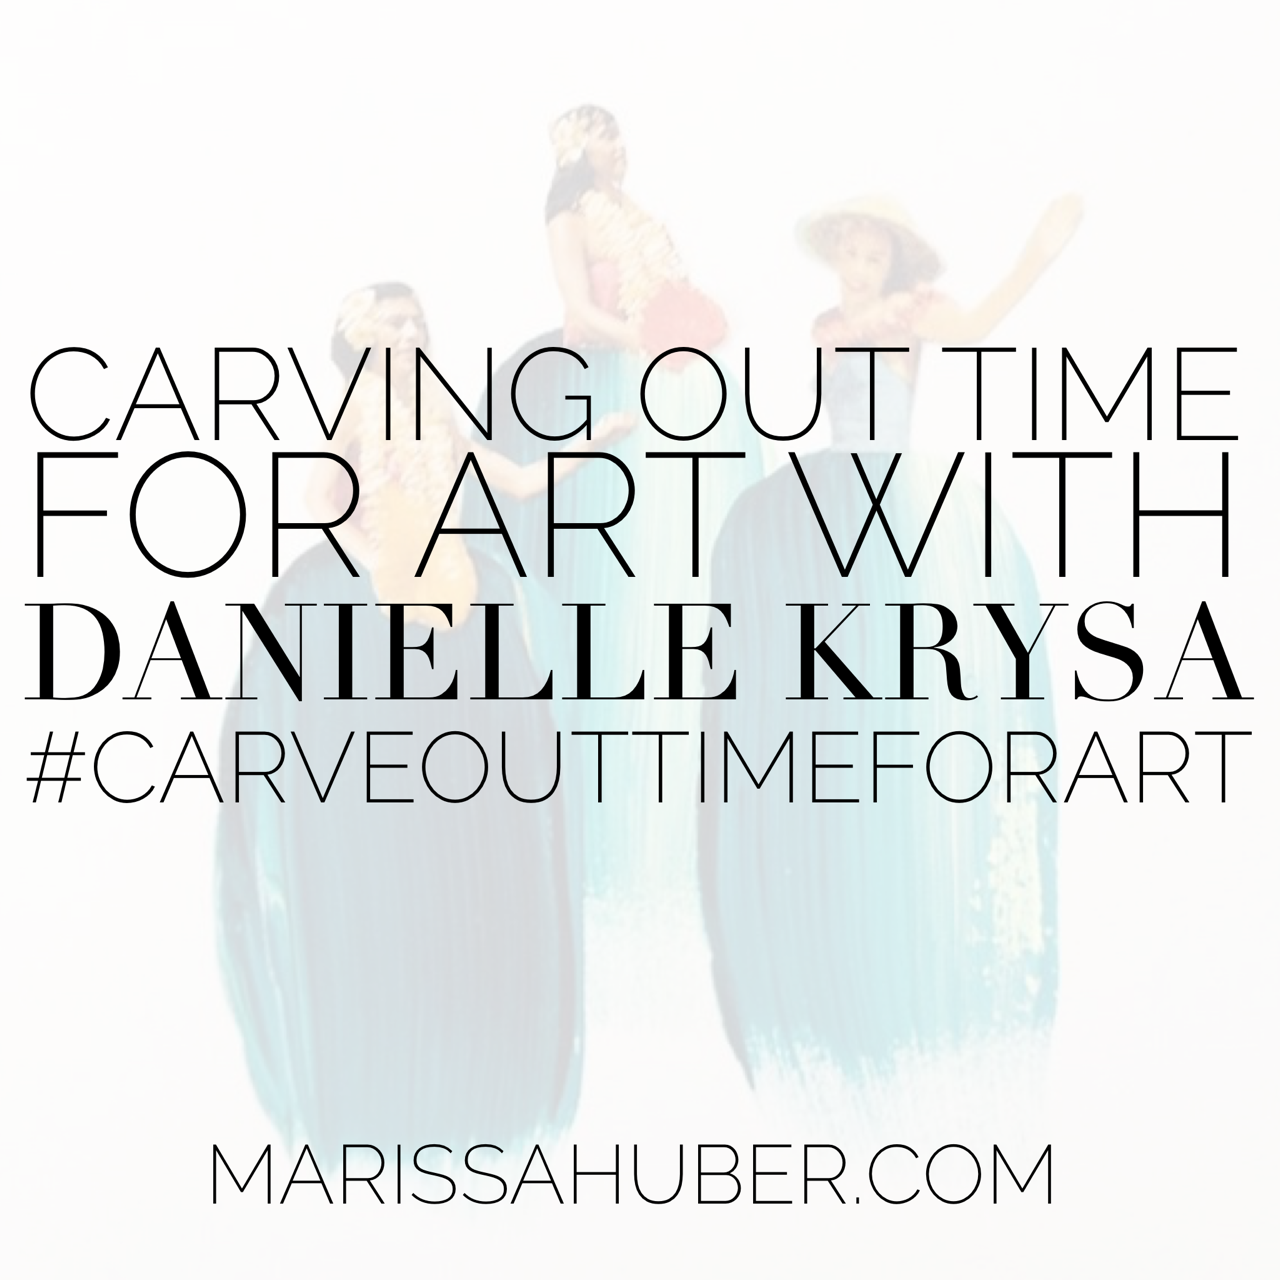 Carve-Out-Time-For-Art-with-Danielle-Krysa.png